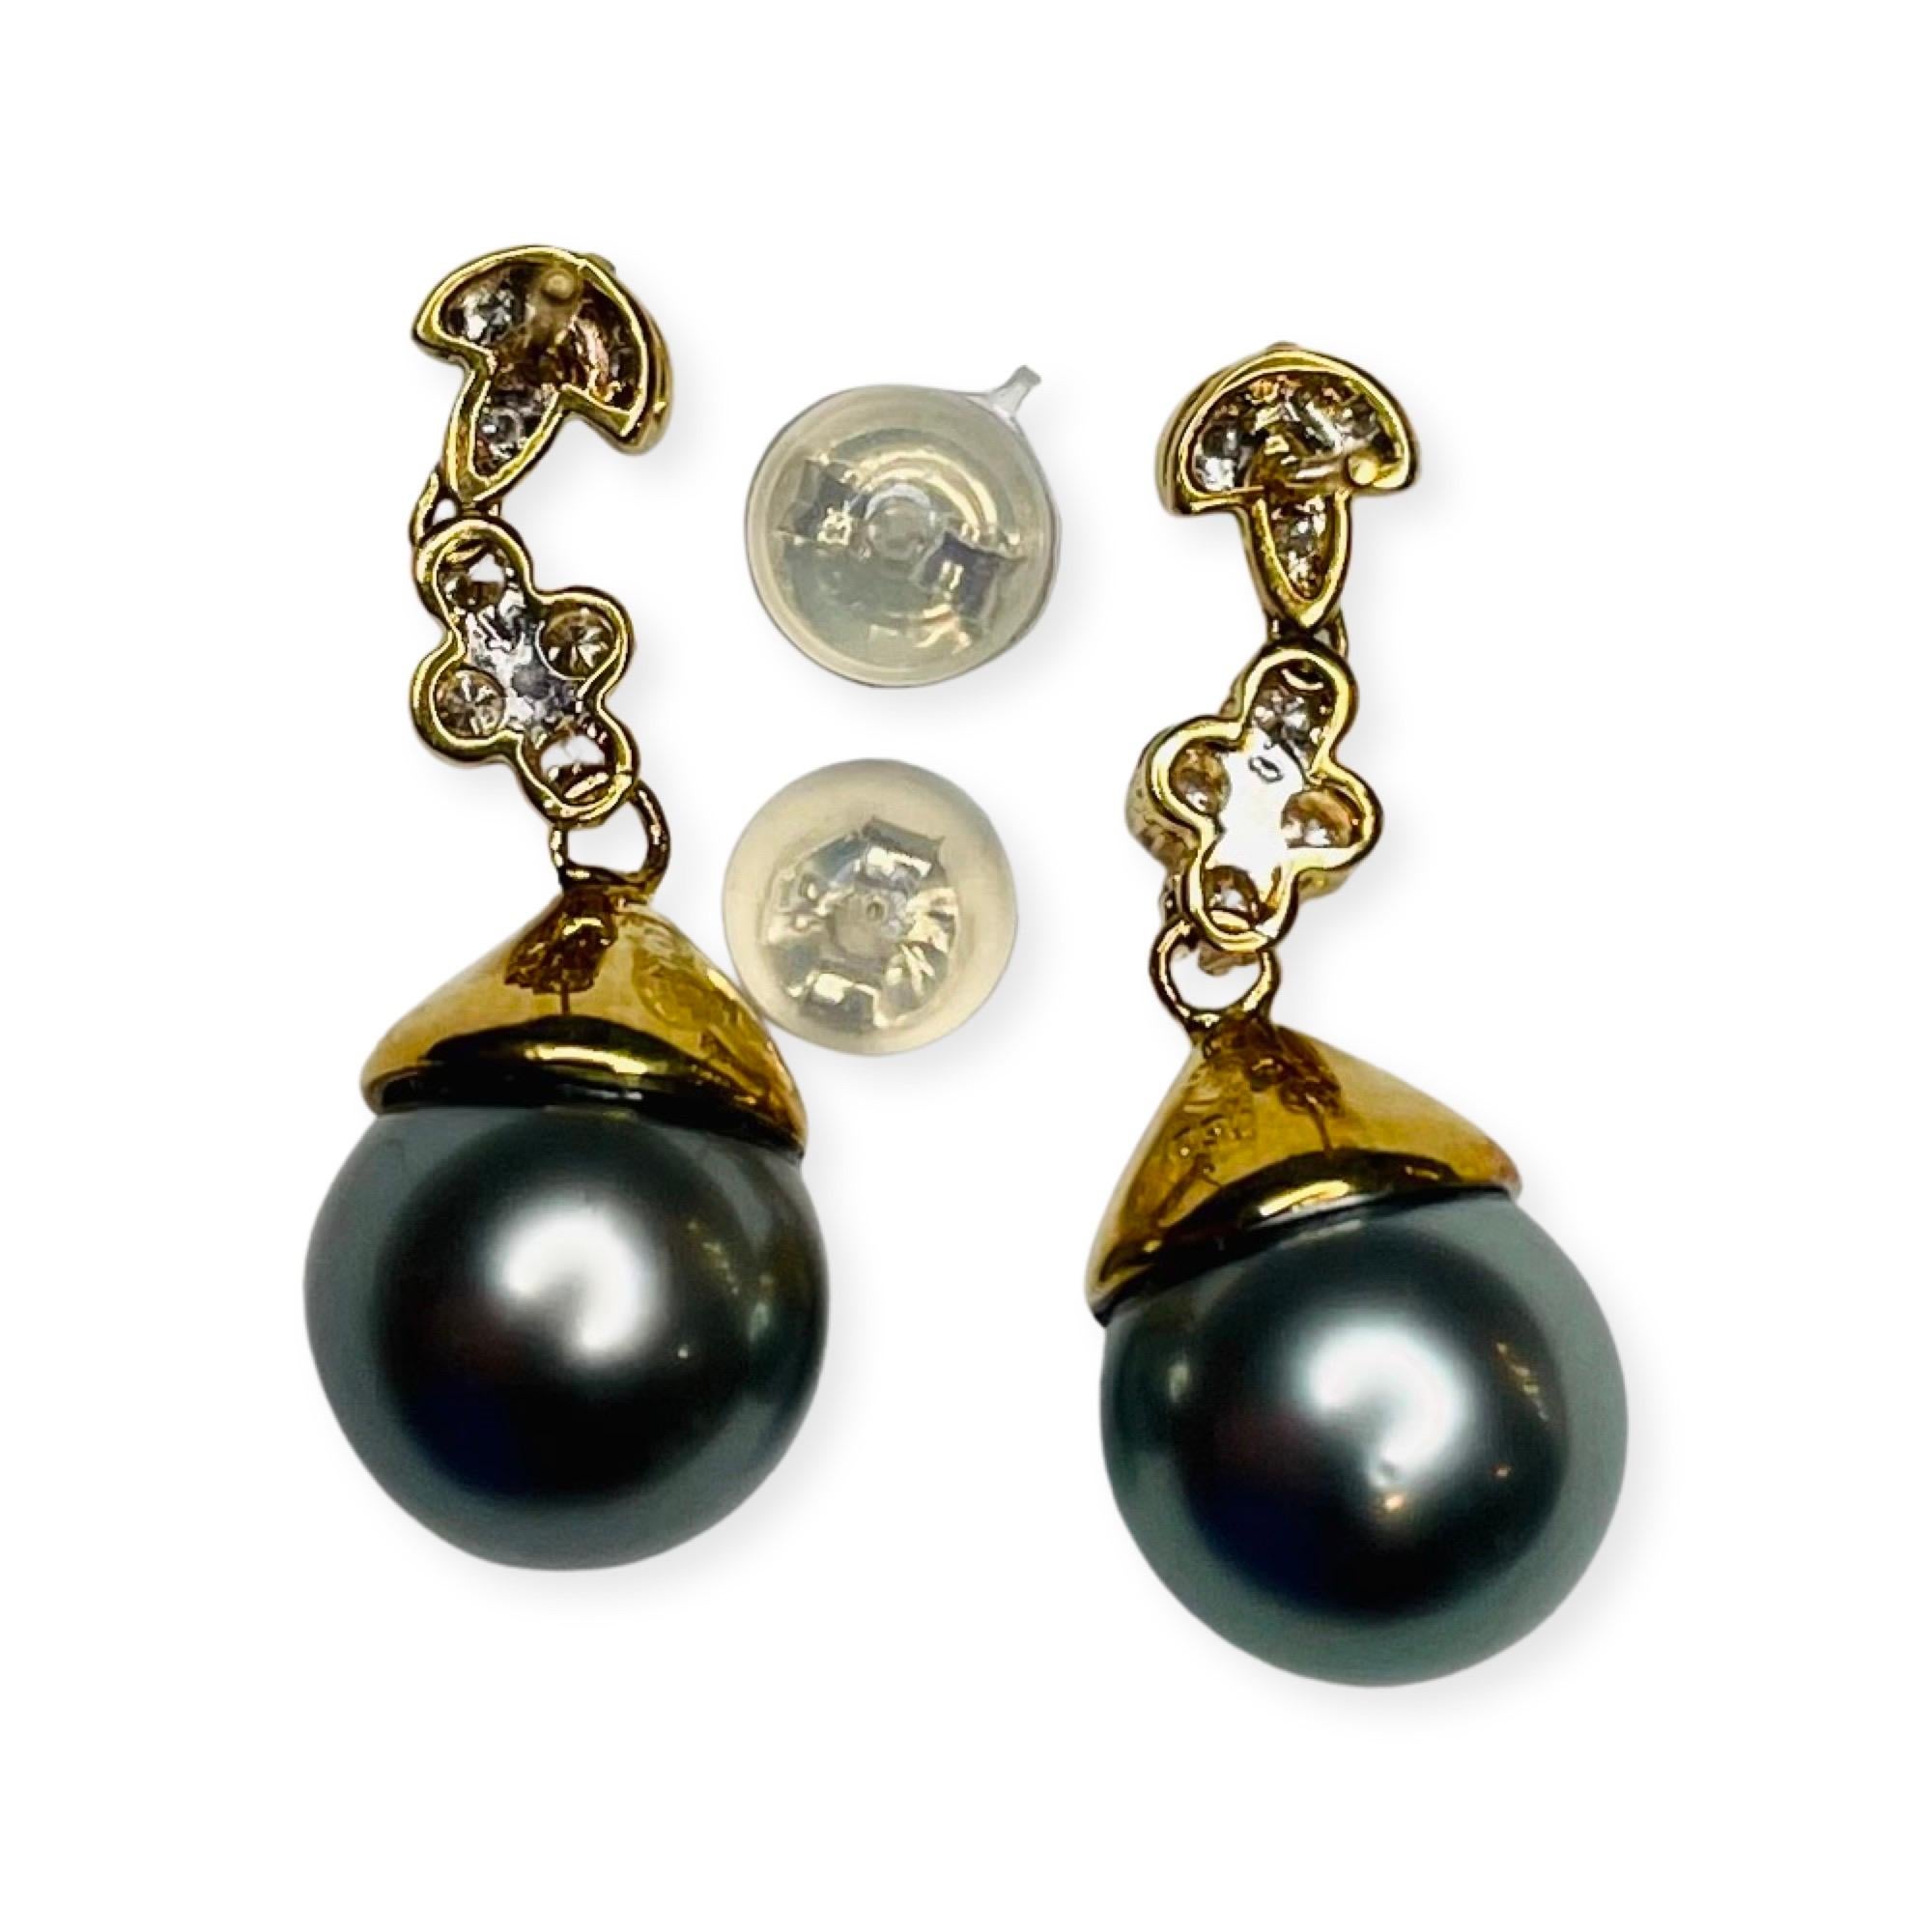 Lithos 18K Yellow Gold Diamond and Natural Color Black Tahitian Pearl Earrings. The pearls are 9.0 mm x 9.5 mm. The pearls are round, with slight blemishes and high luster. They have a greenish purple overtone. They are 27.0 mm long. There are 24